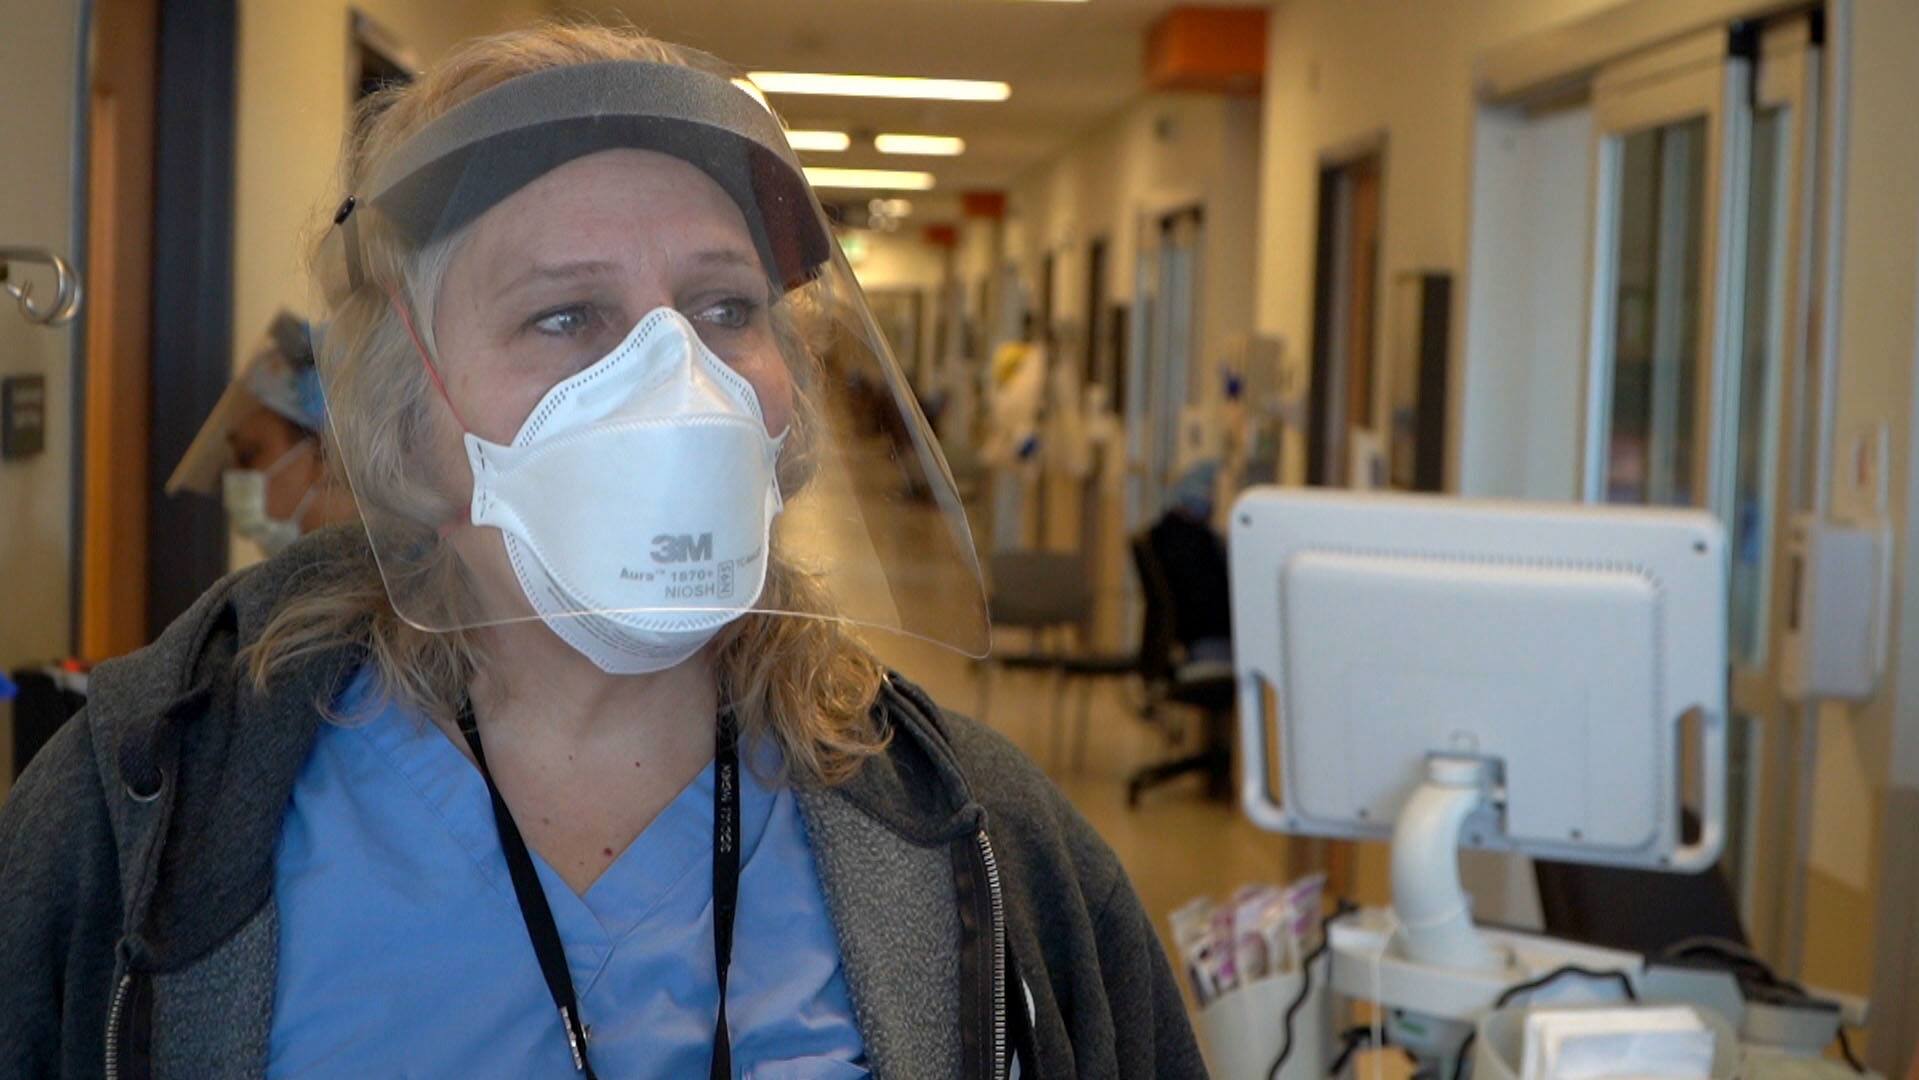 This is what the latest pandemic wave is like for the ICU team at Humber River Hospital